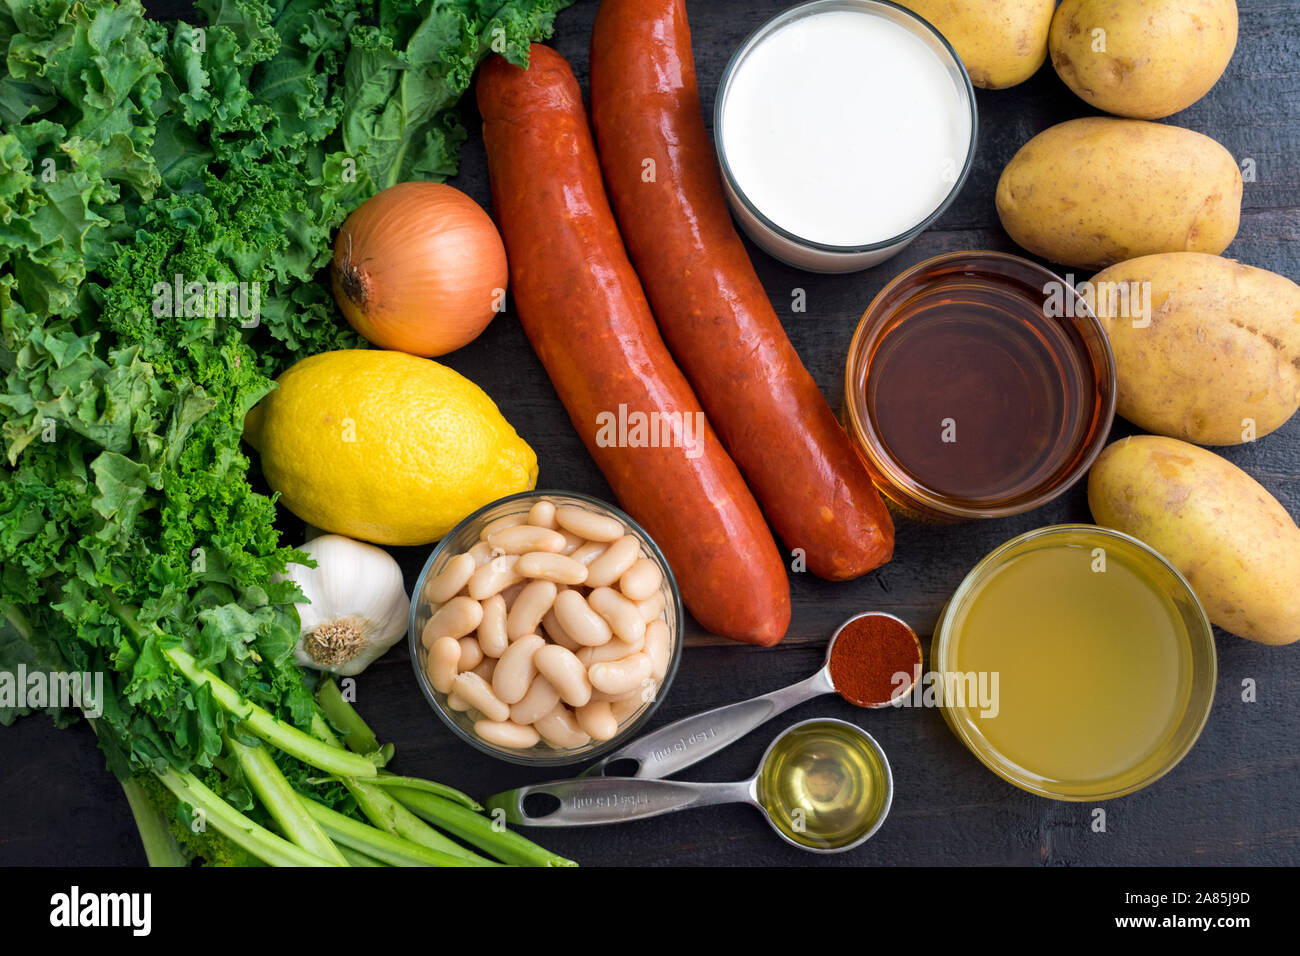 Portuguese Caldo Verde Soup Ingredients: Sausage, kale, potatoes, and other ingredients used to make a traditional Portuguese soup Stock Photo